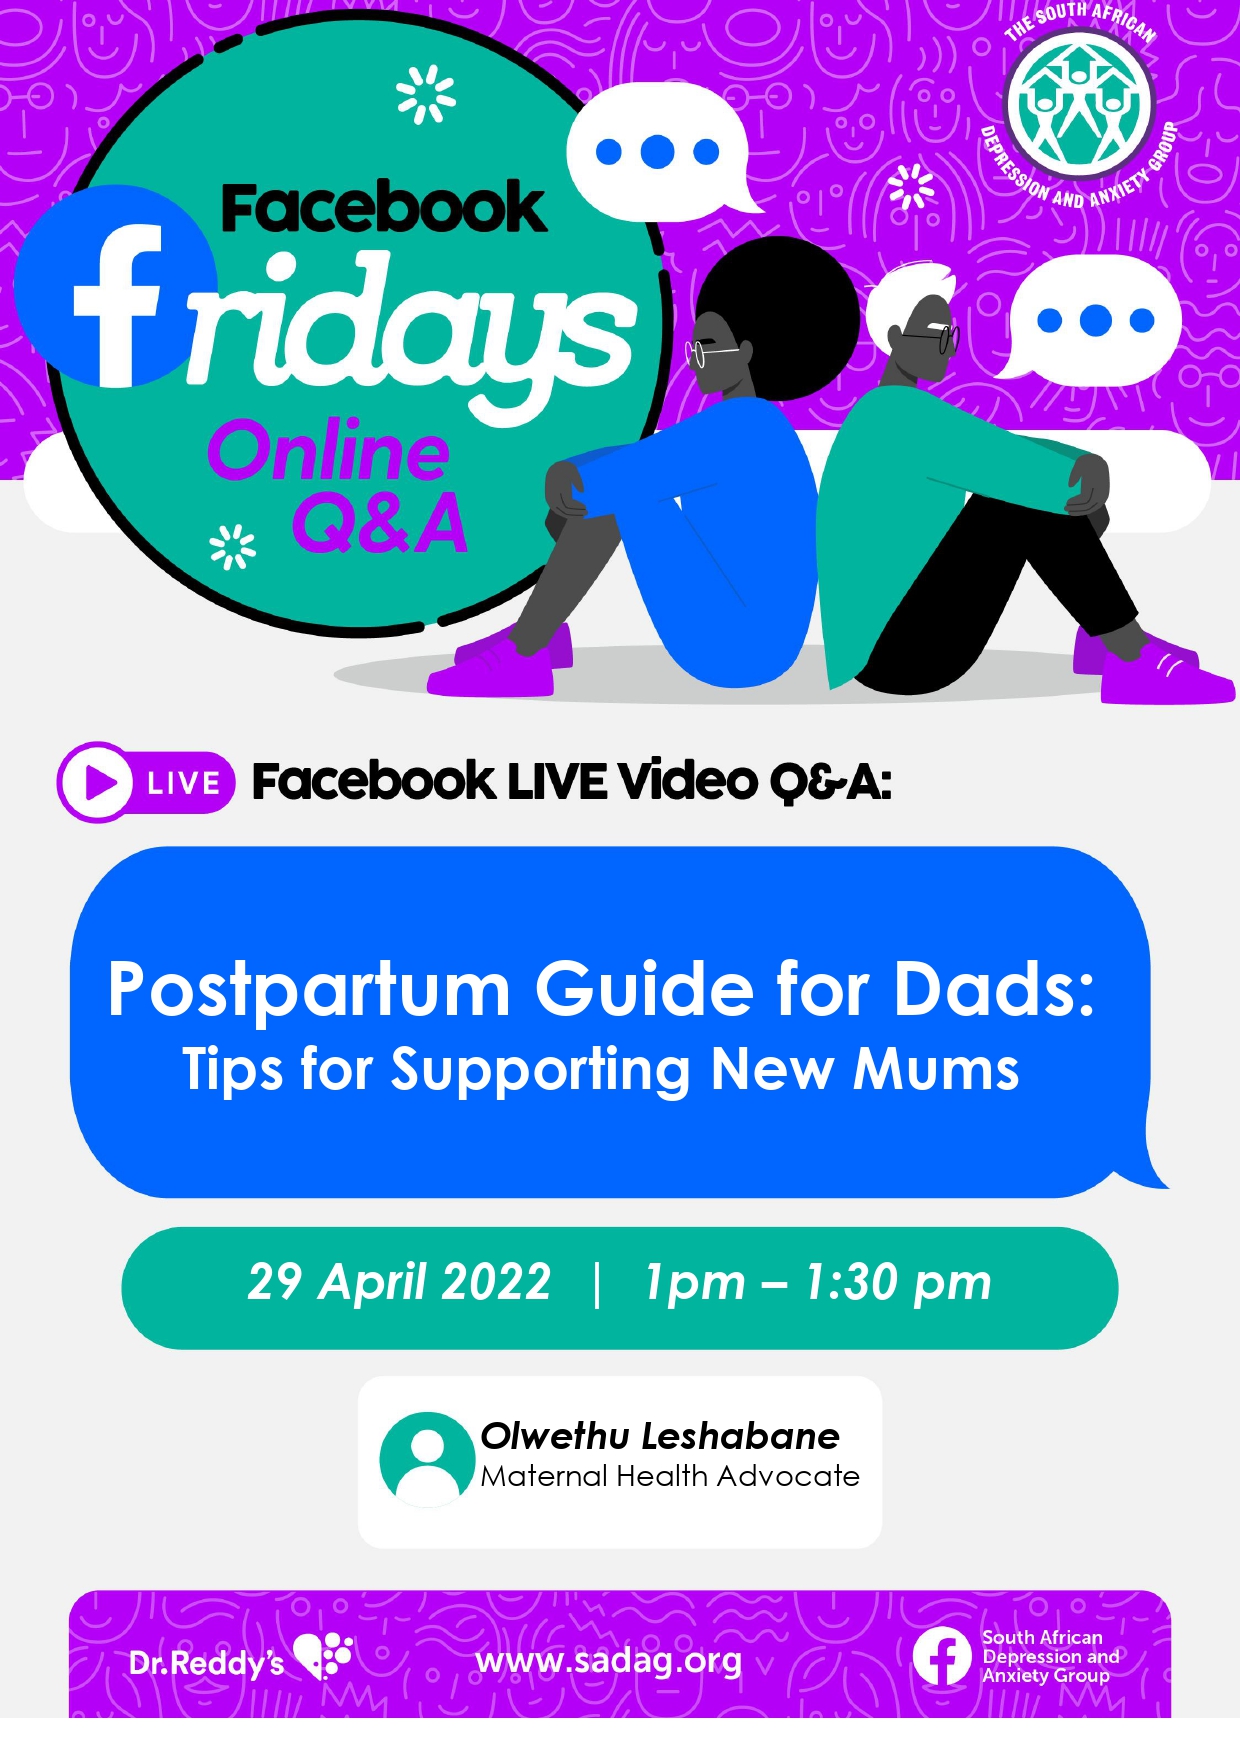 A poster advertising a Facebook live question-and-answer session titled “Postpartum Guide for Dads: Tips for Supporting New Mums”, hosted by the South African Depression and Anxiety Group